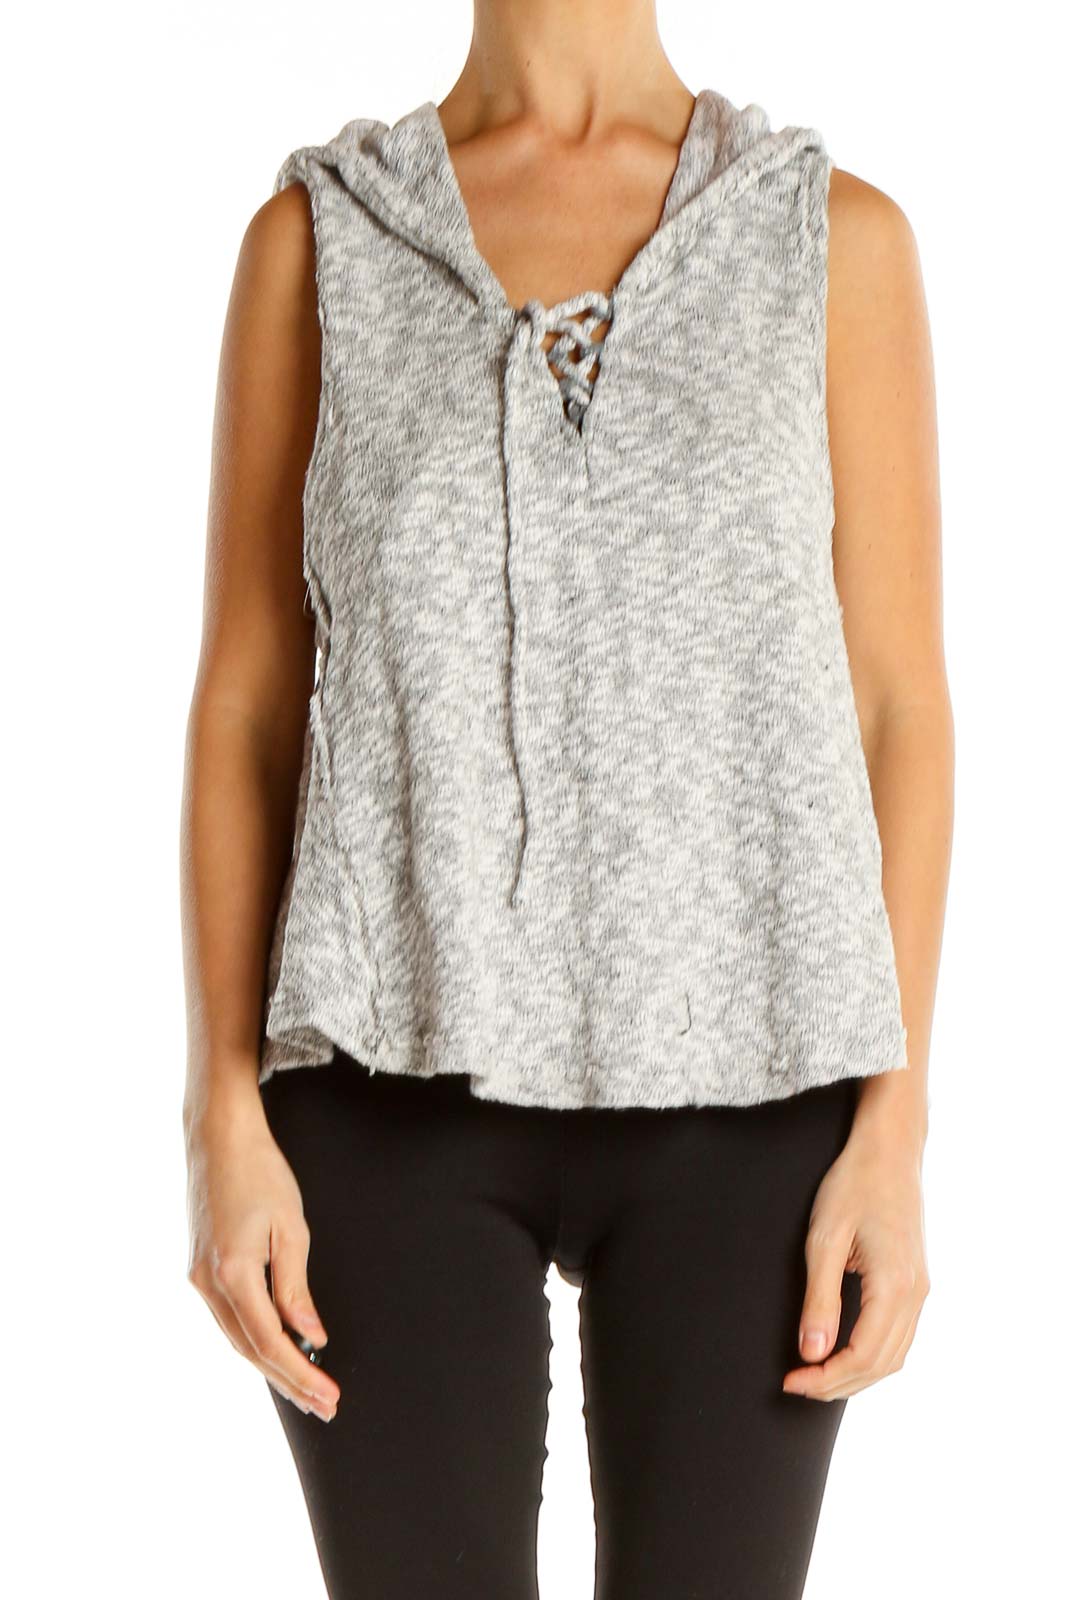 Gray Lace Up All Day Wear Top Front